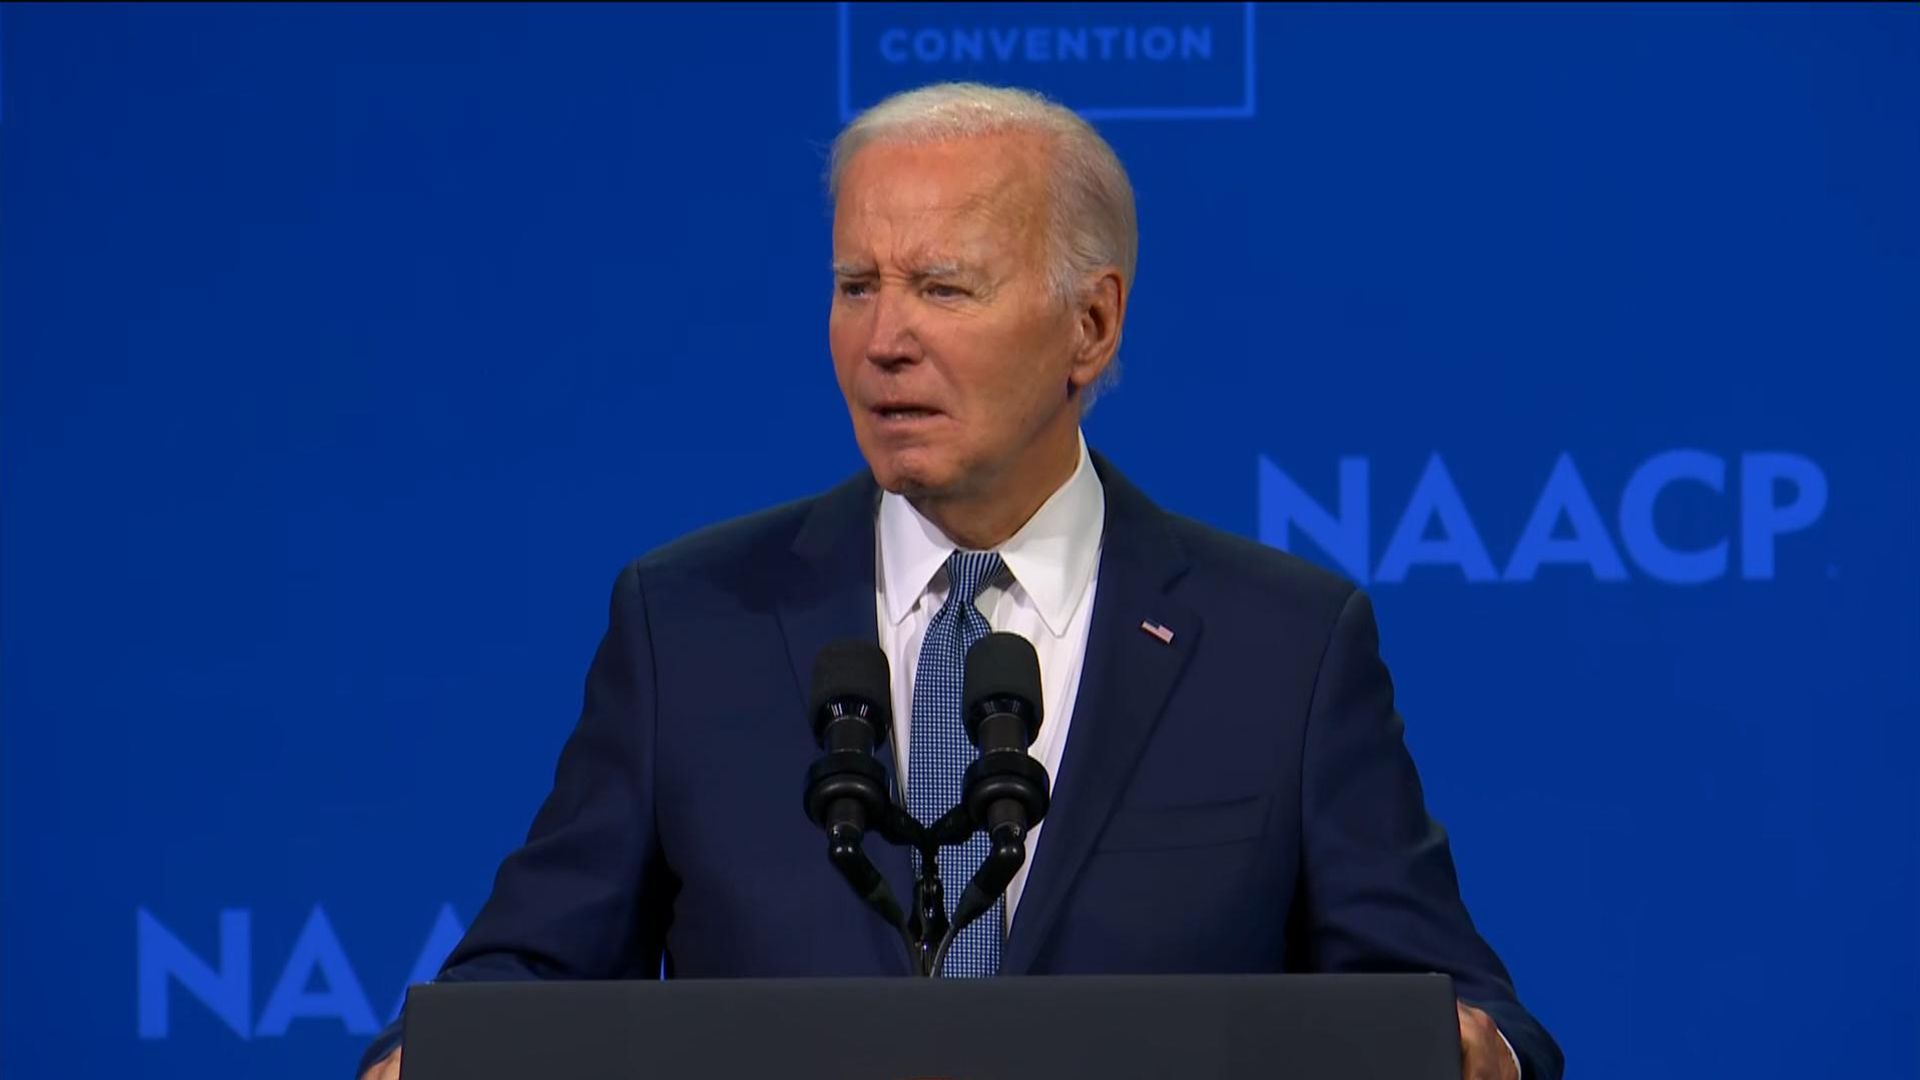 Biden campaign insists he will remain Democrat presidential candidate for US election